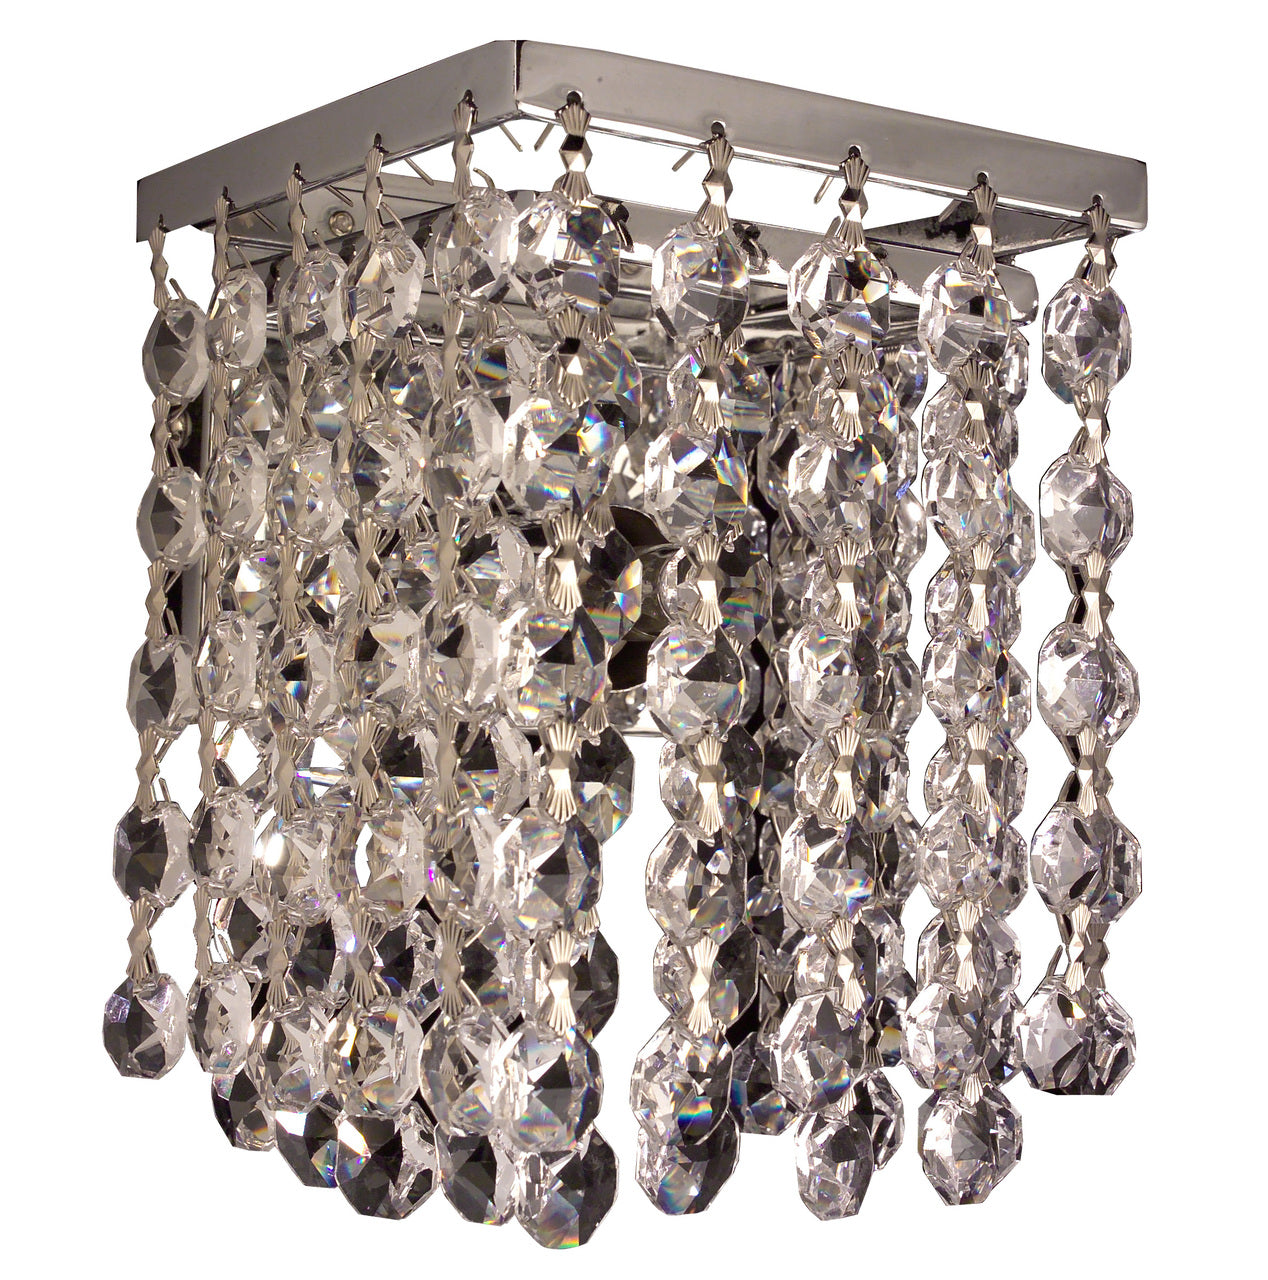 Classic Lighting 16102 AM Bedazzle Crystal Wall Sconce in Chrome